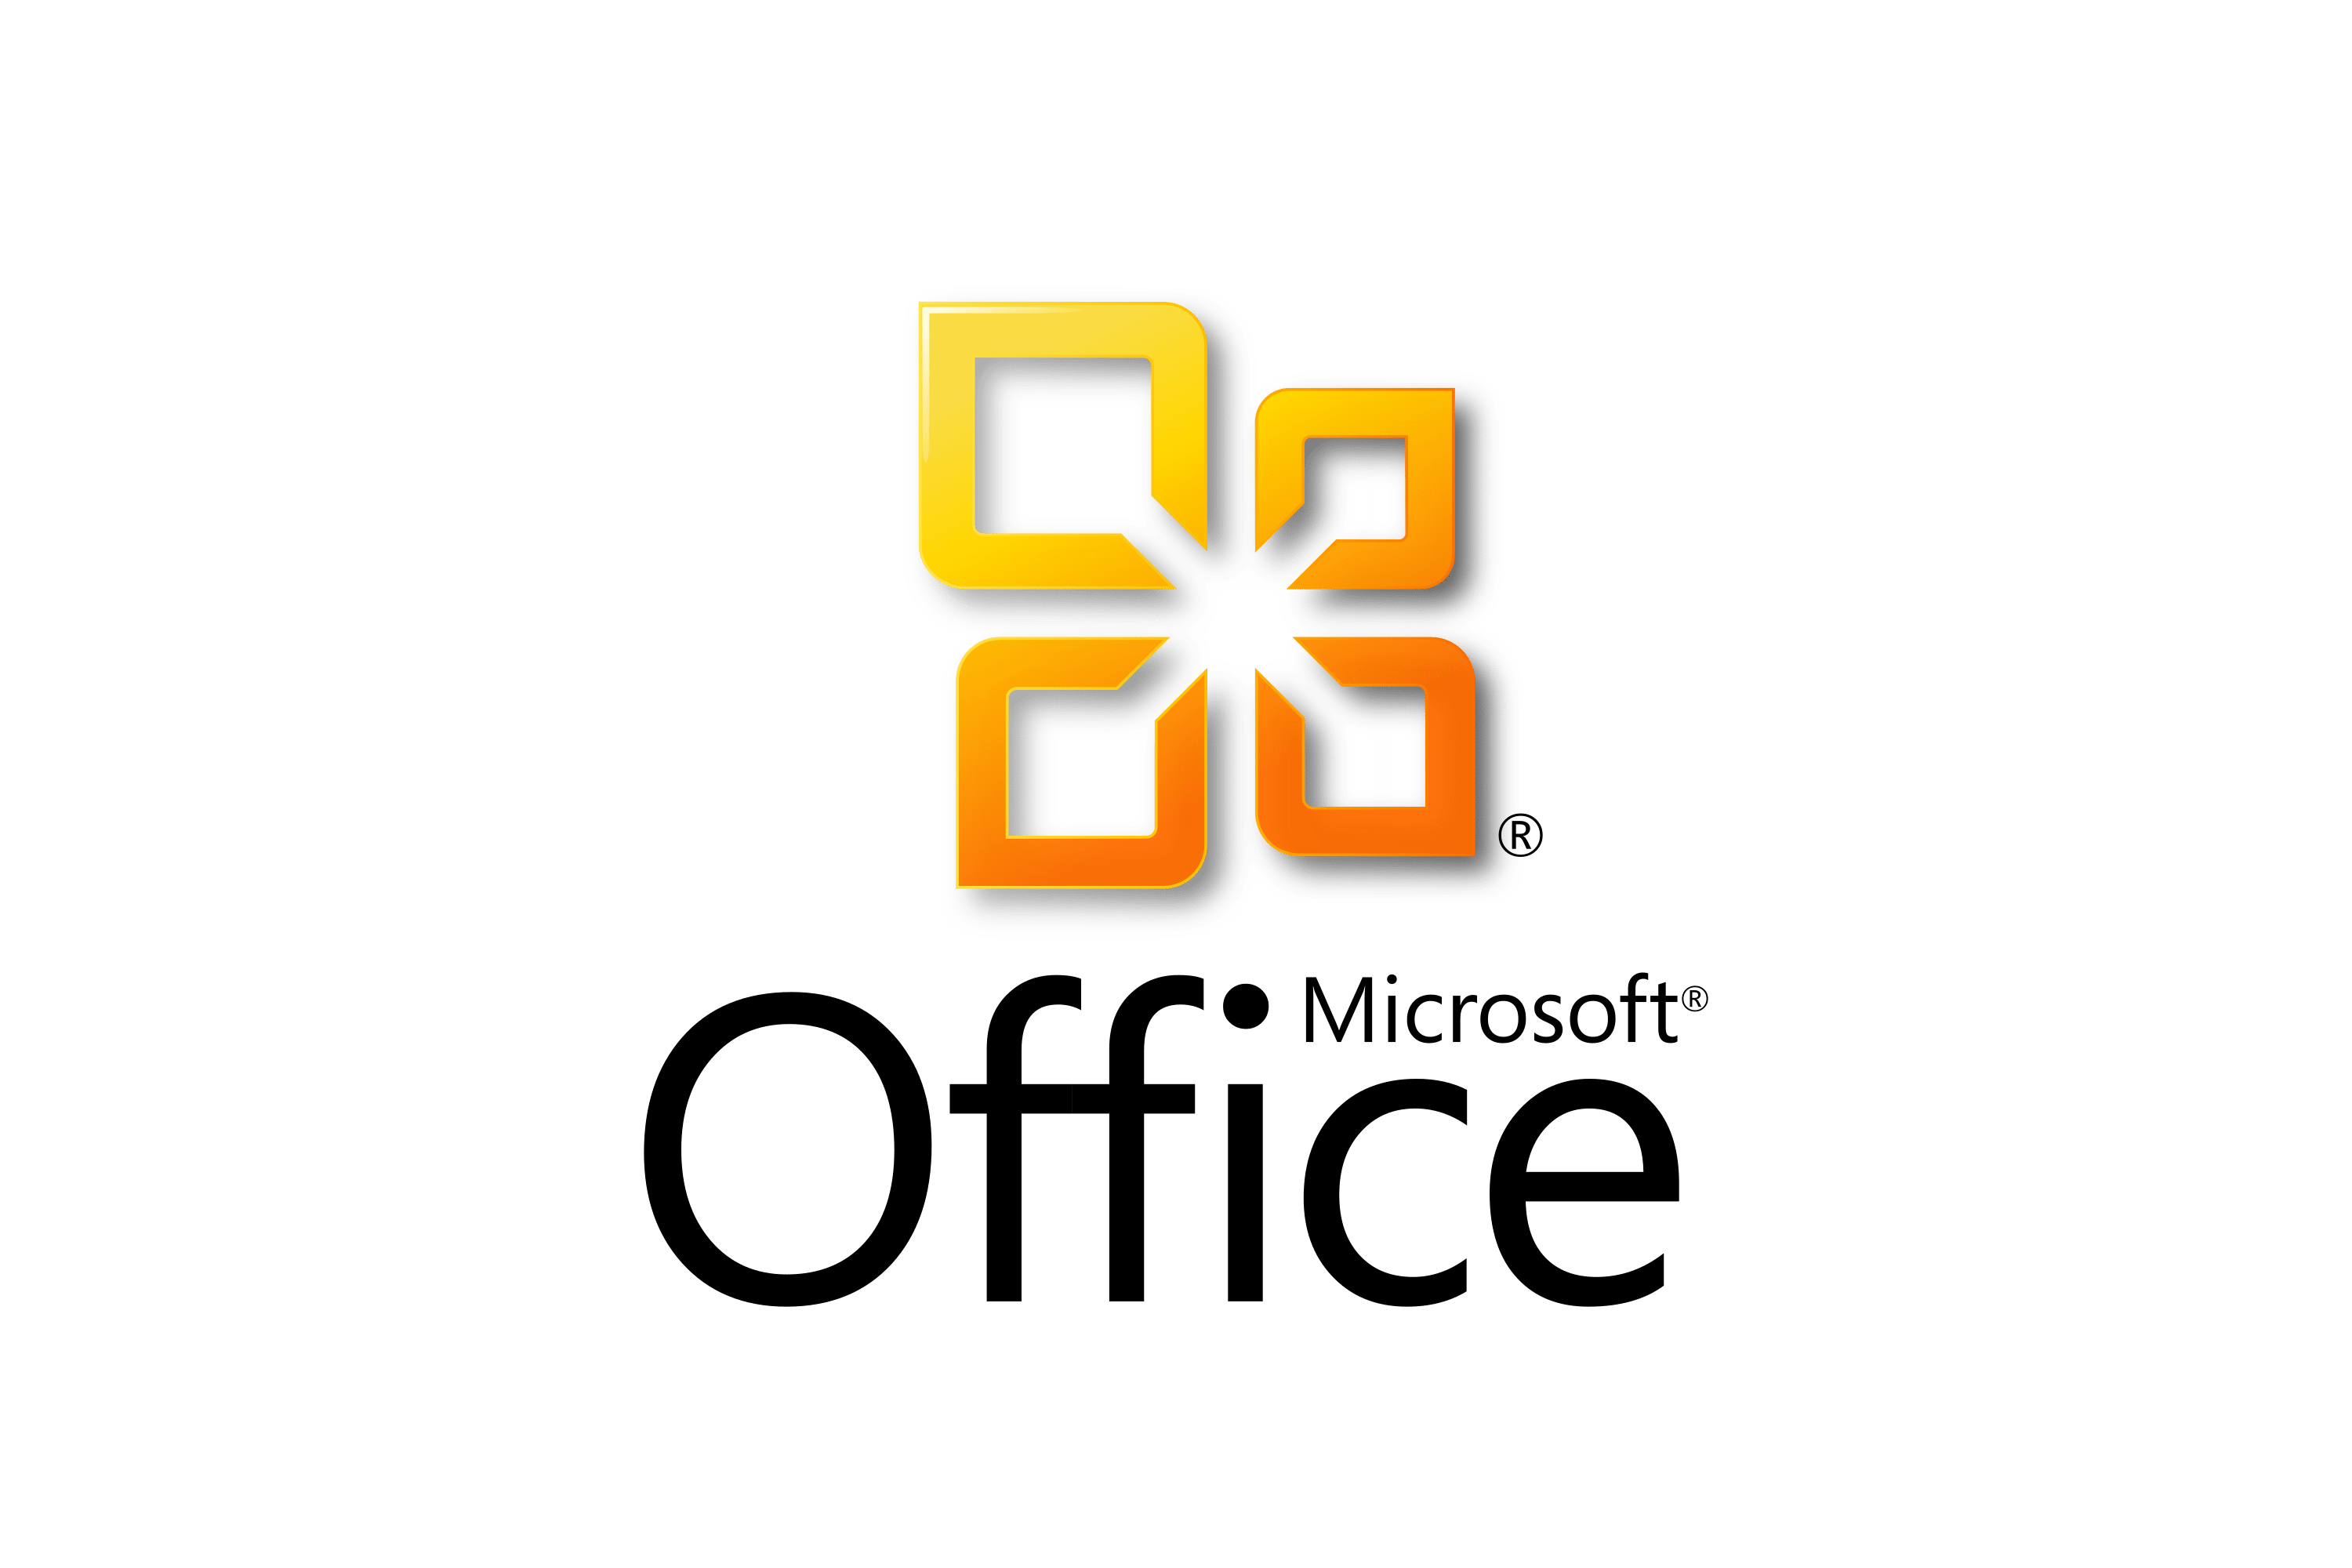 Download Microsoft Office 2010 (Office 14) Logo in SVG Vector or PNG